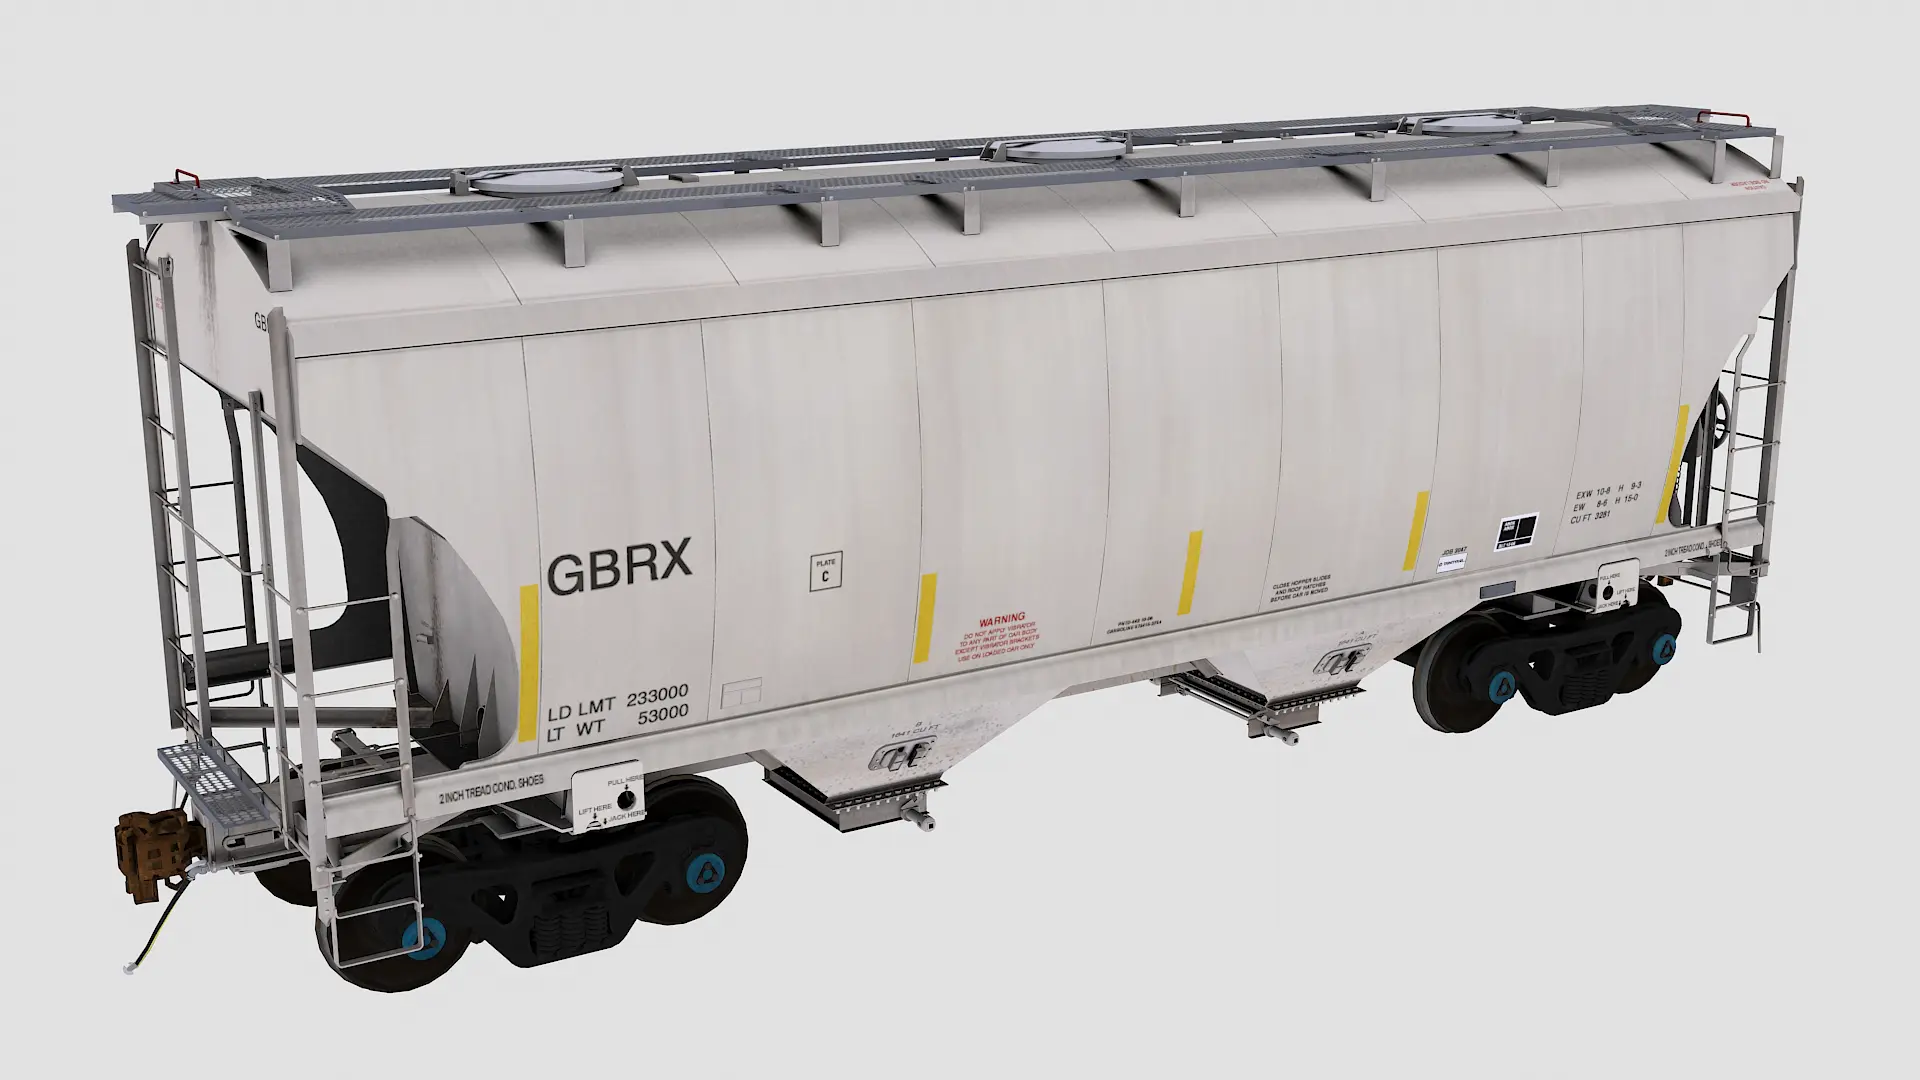 Gbrx. two bay covered hopper